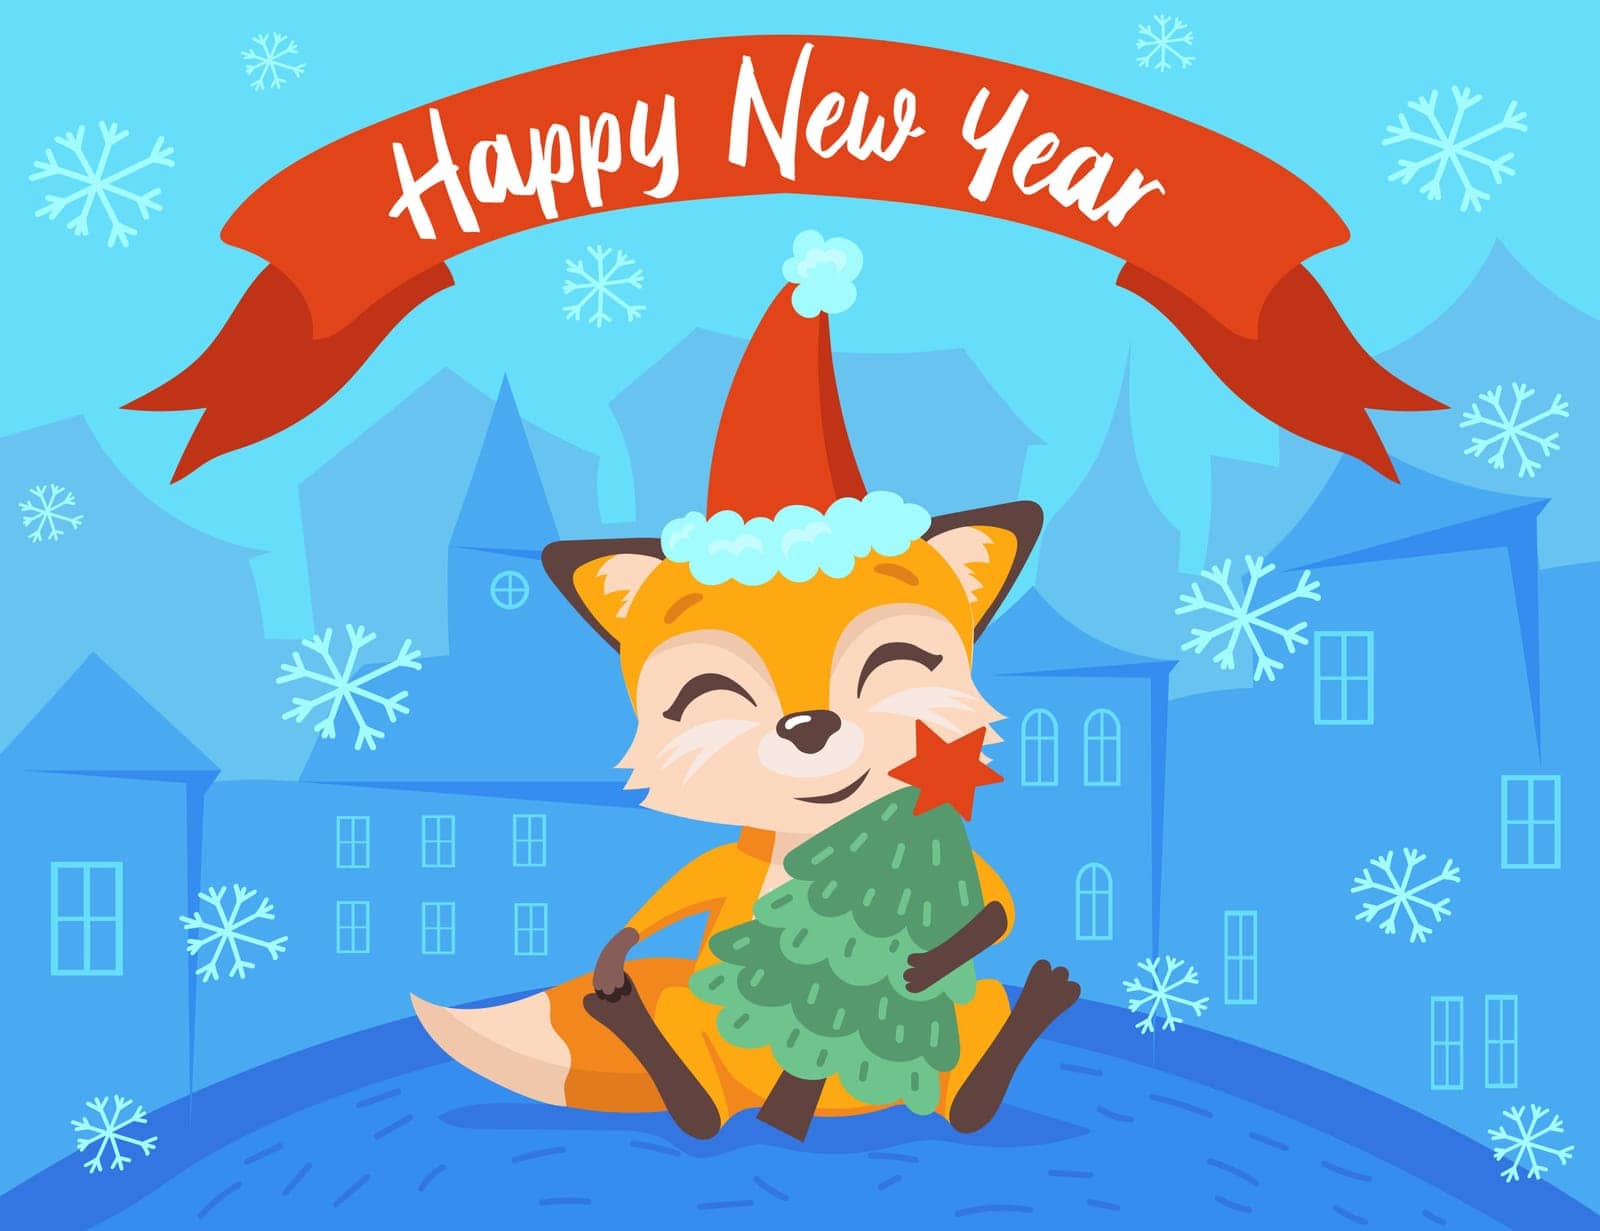 Smiling fox character with Christmas tree cartoon illustration by pchvector